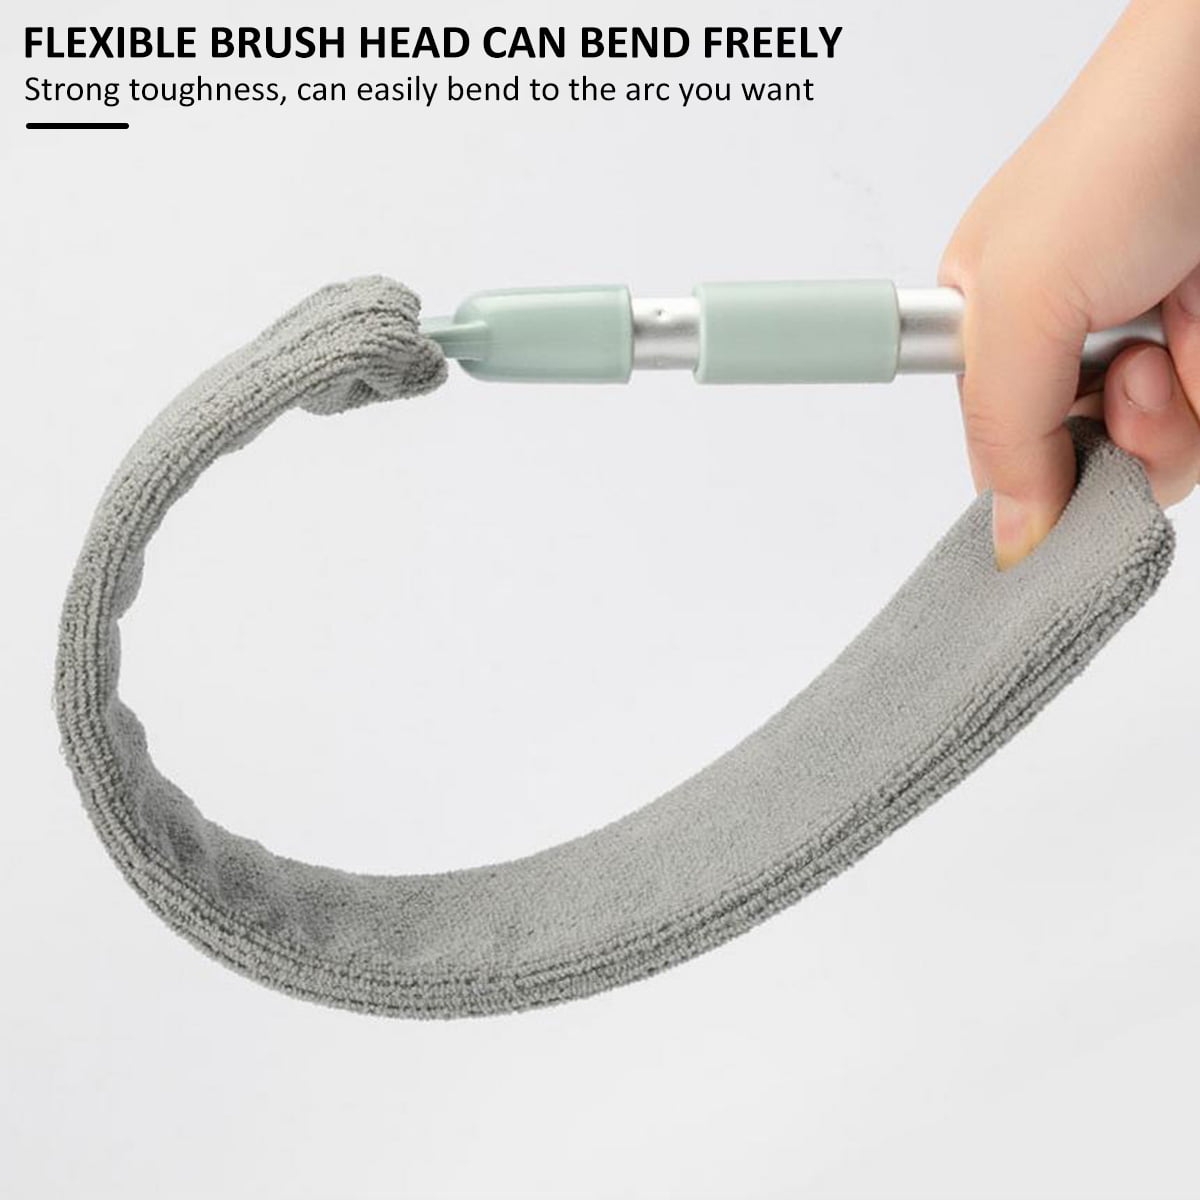 Retractable Gap Dust Cleaner Long Handle Bedside Dust Brush Cleaning Brush  For Sofa Gap Flexible Floor Mop Home Cleaning Tool